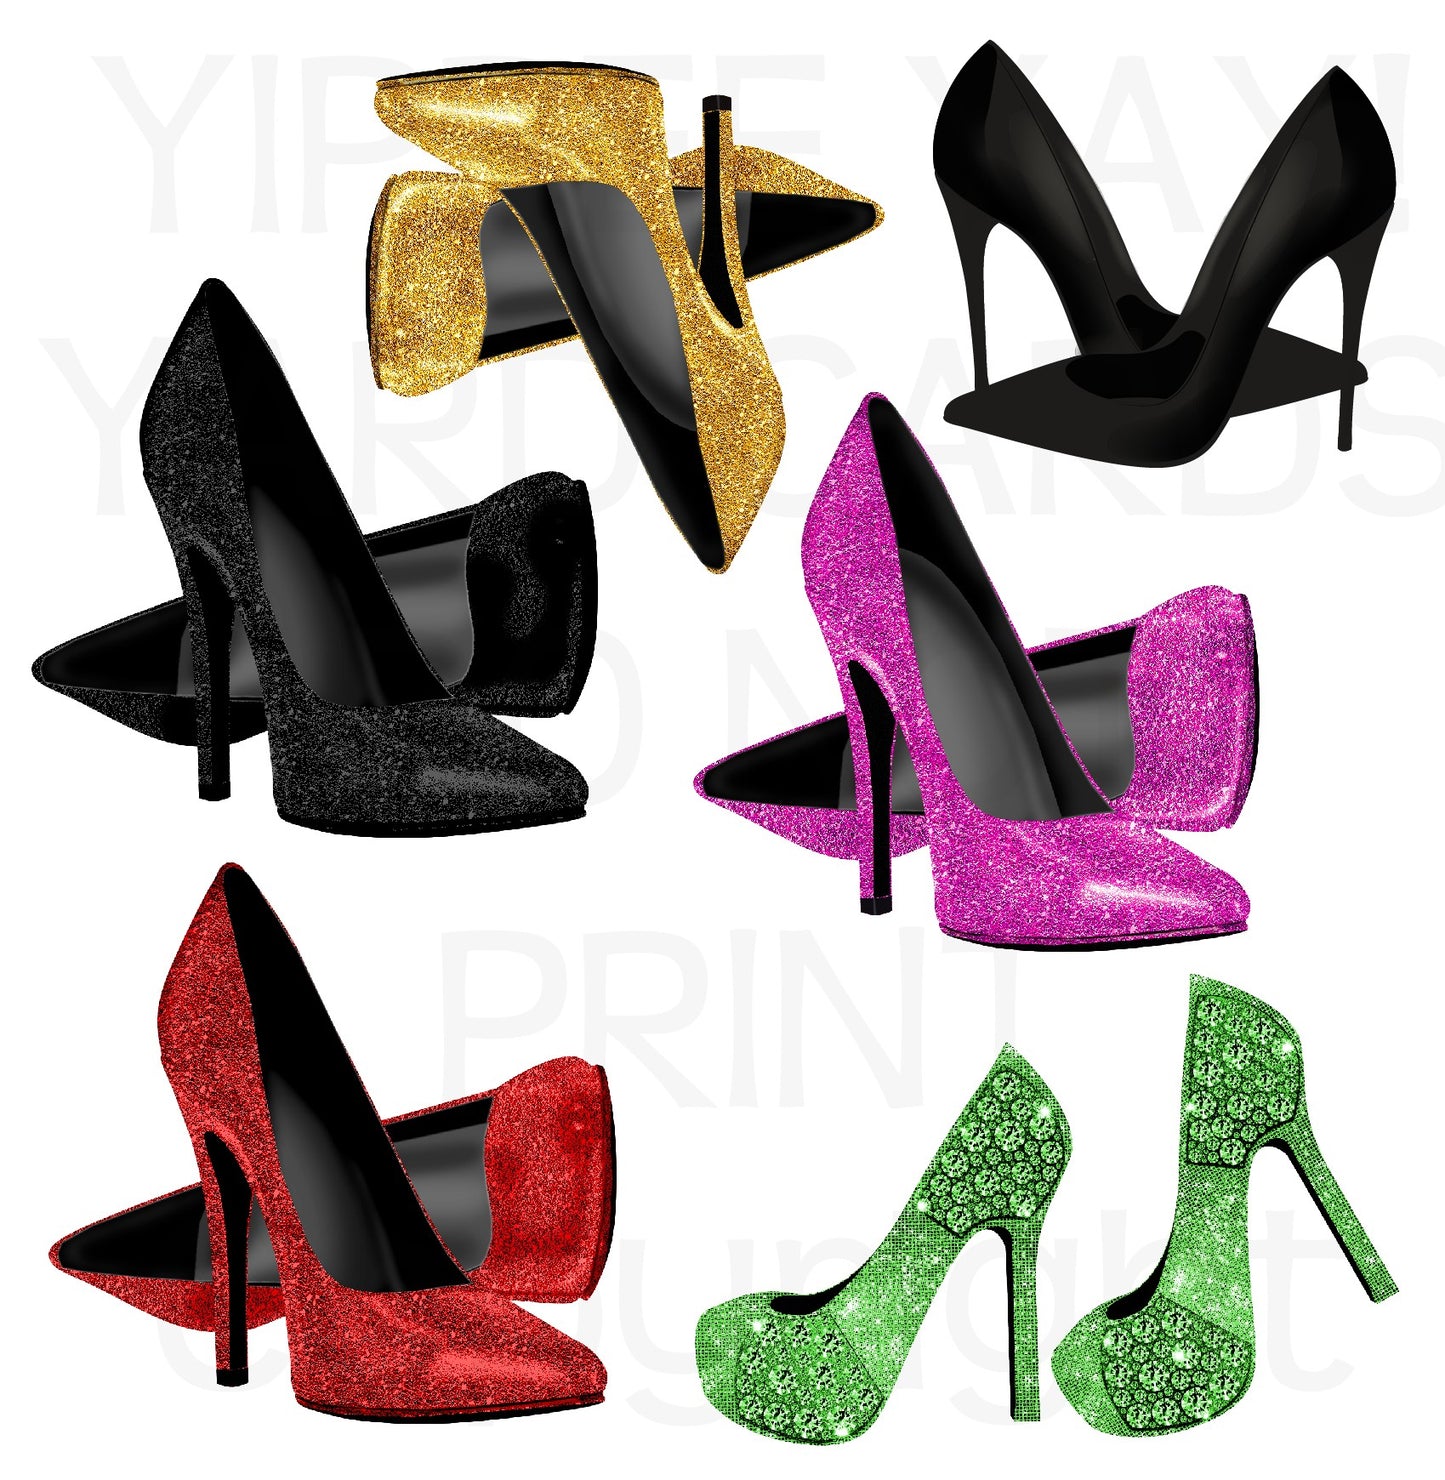 High Heels - Shoes Half Sheet Misc. (Must Purchase 2 Half sheets - You Can Mix & Match)